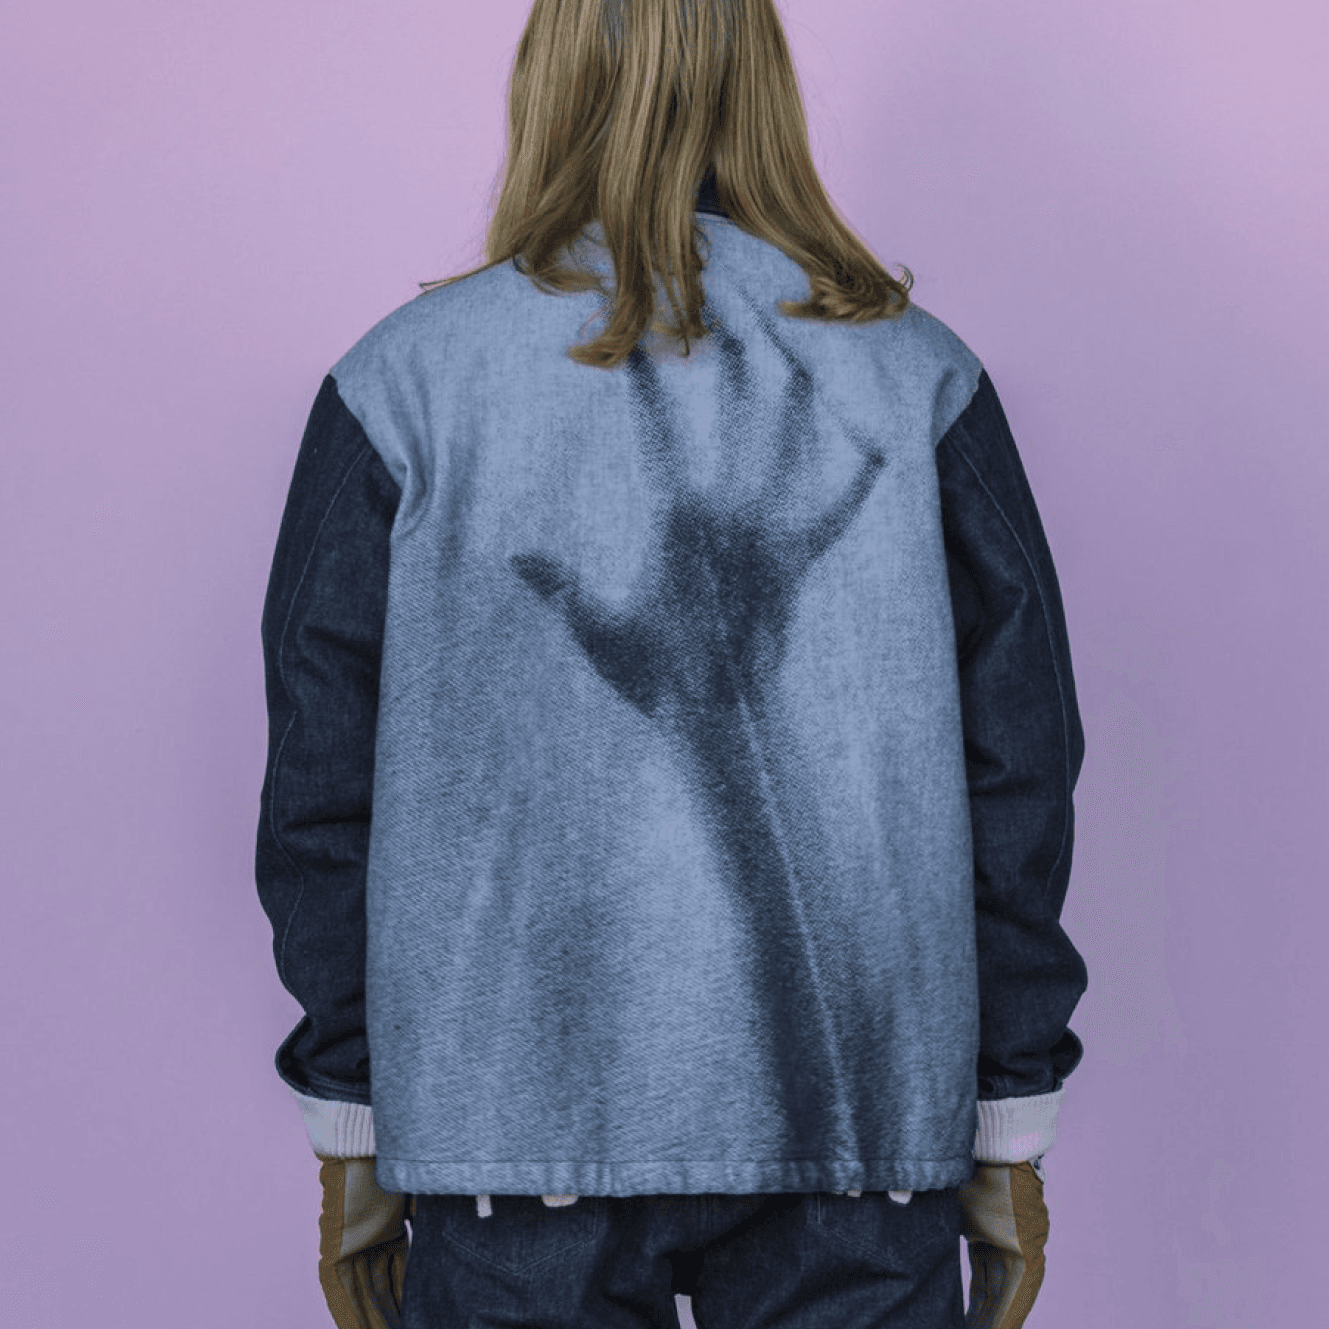 jacket featuring a large hand print across the back